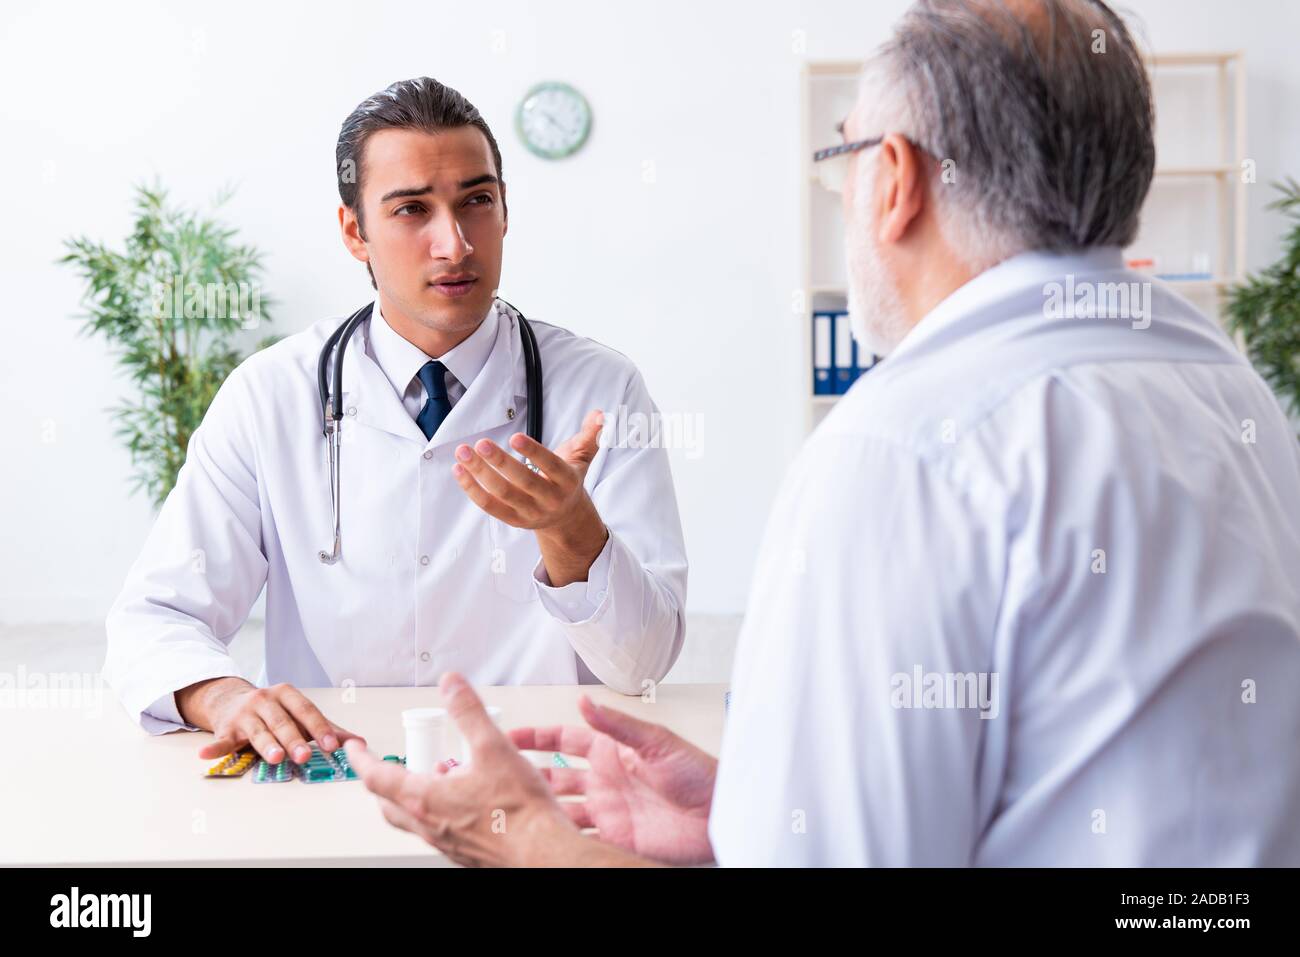 Old man visiting young male doctor Stock Photo